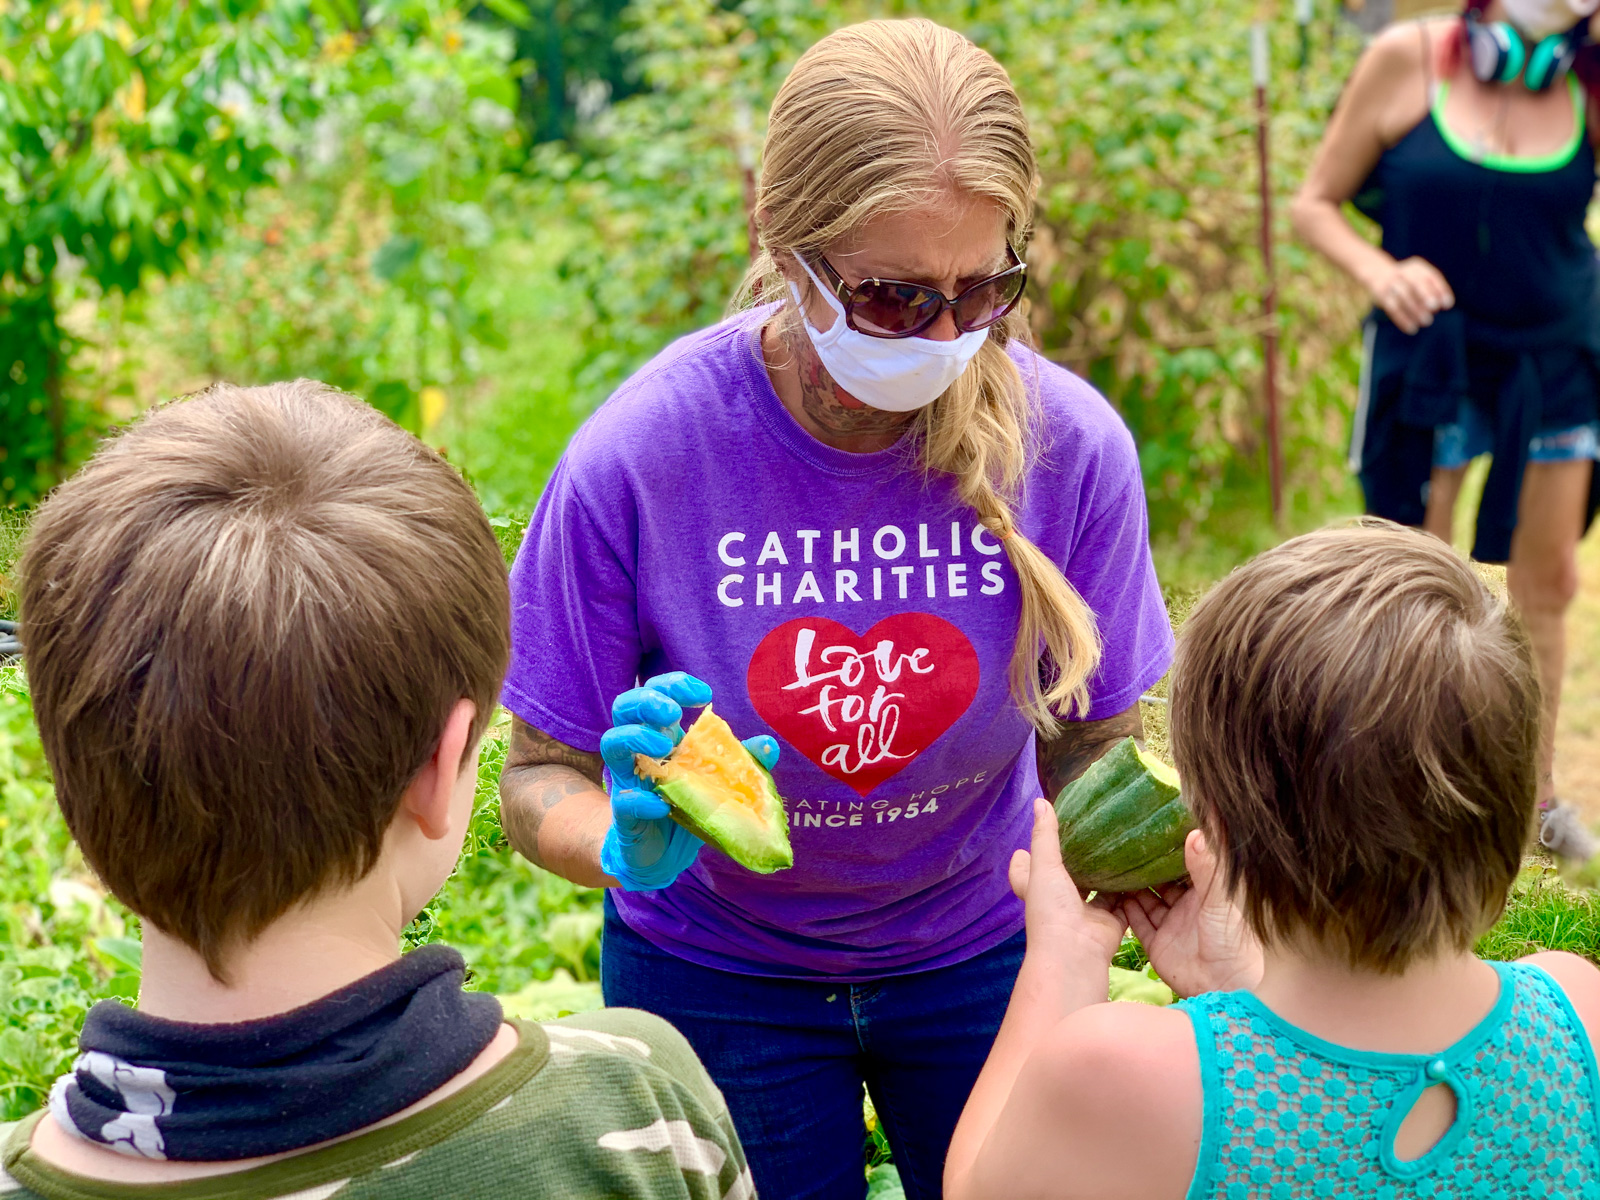 Catholic Charities worker wearing a Catholic Charities t-shirt and sharing garden-grown vegetables with kids.